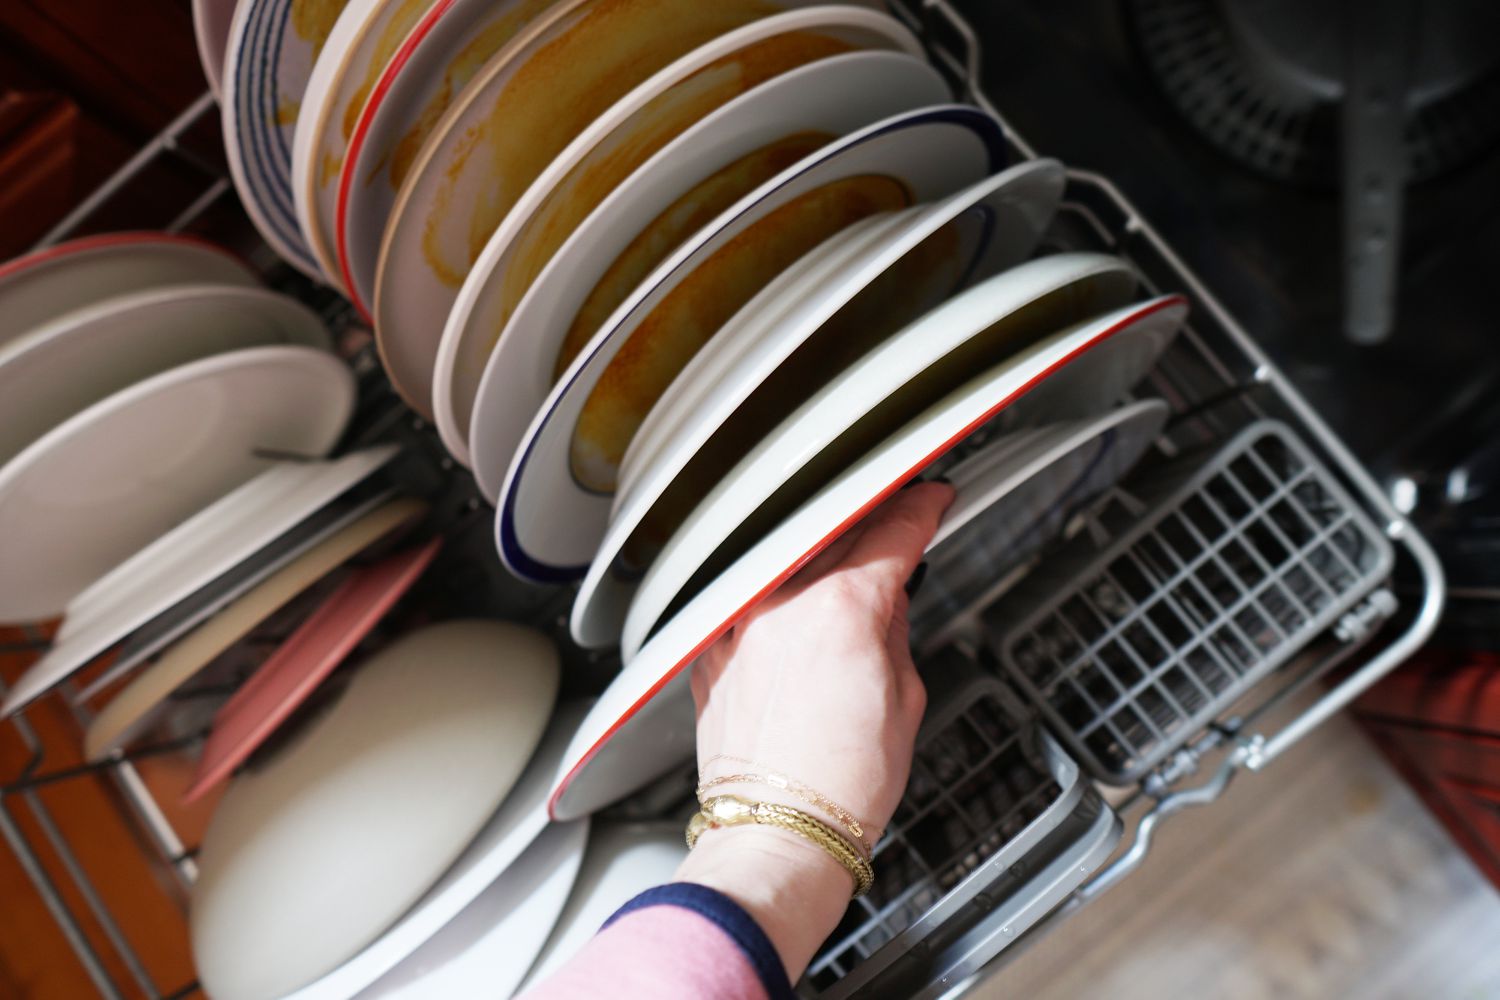 A person loading dinnerware into a dishwasher